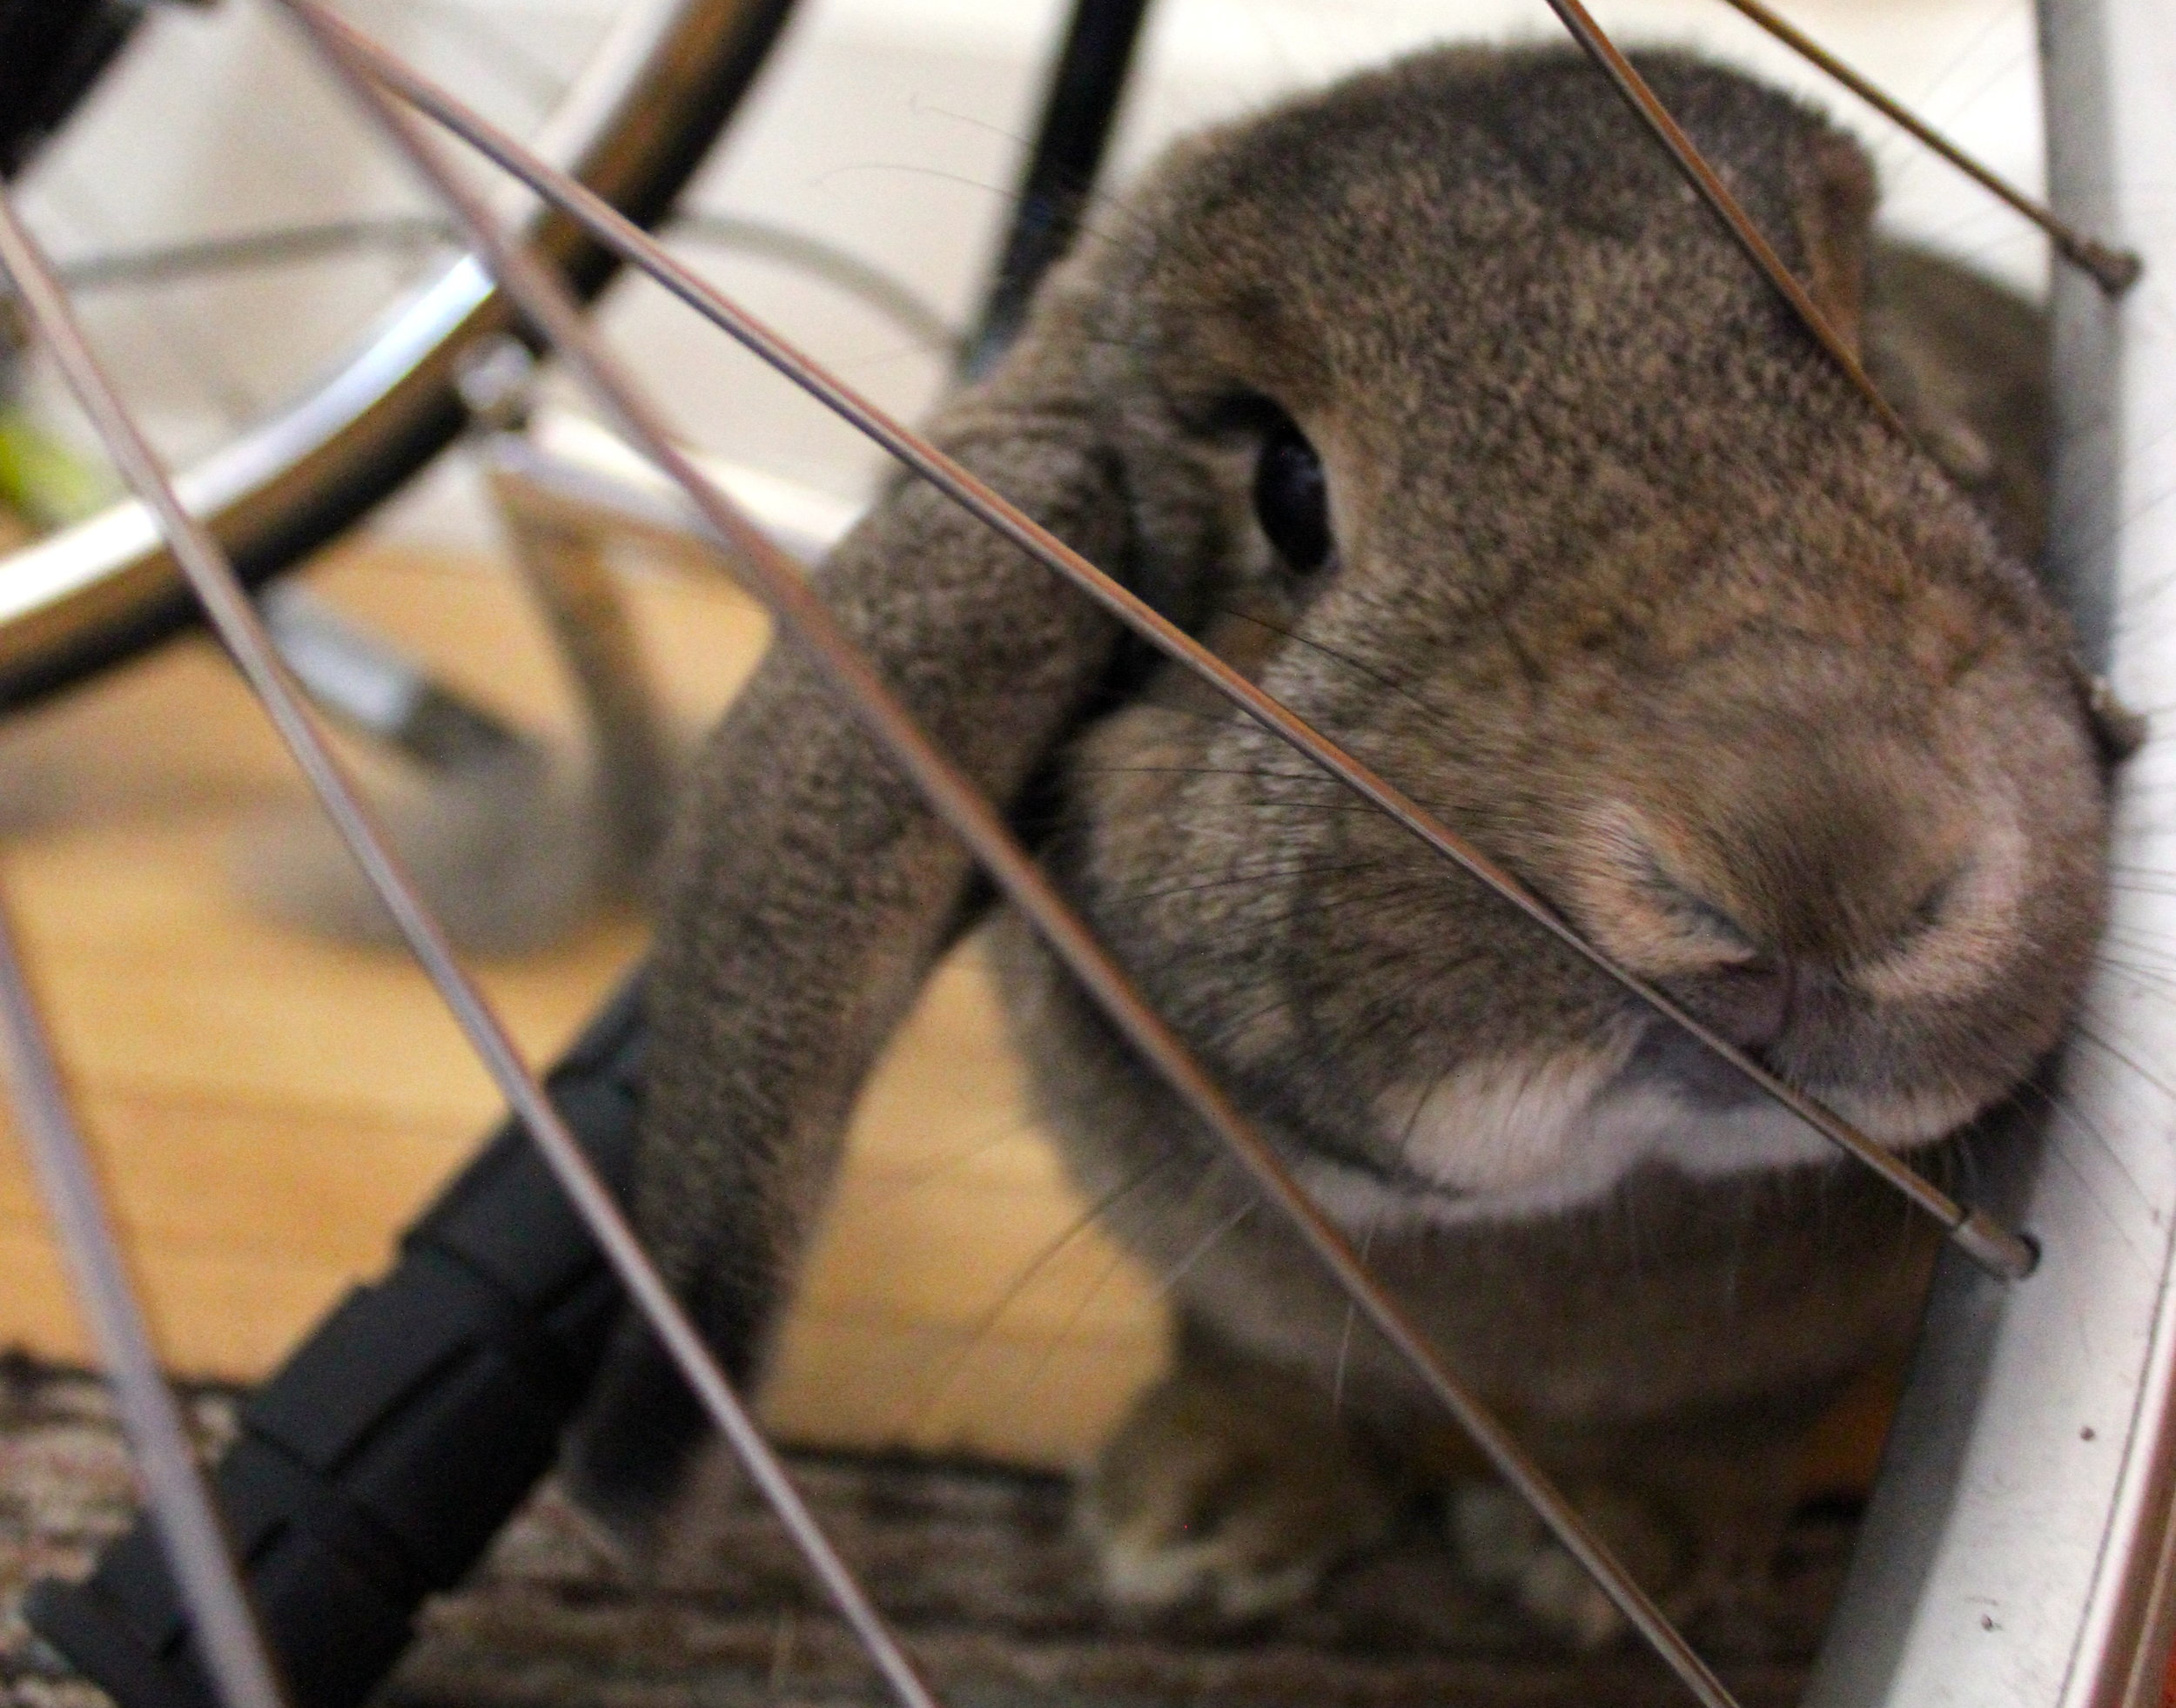 Forensic Scientist Bunny Sniffs Hooman's Bike for Signs of the Farmers Market